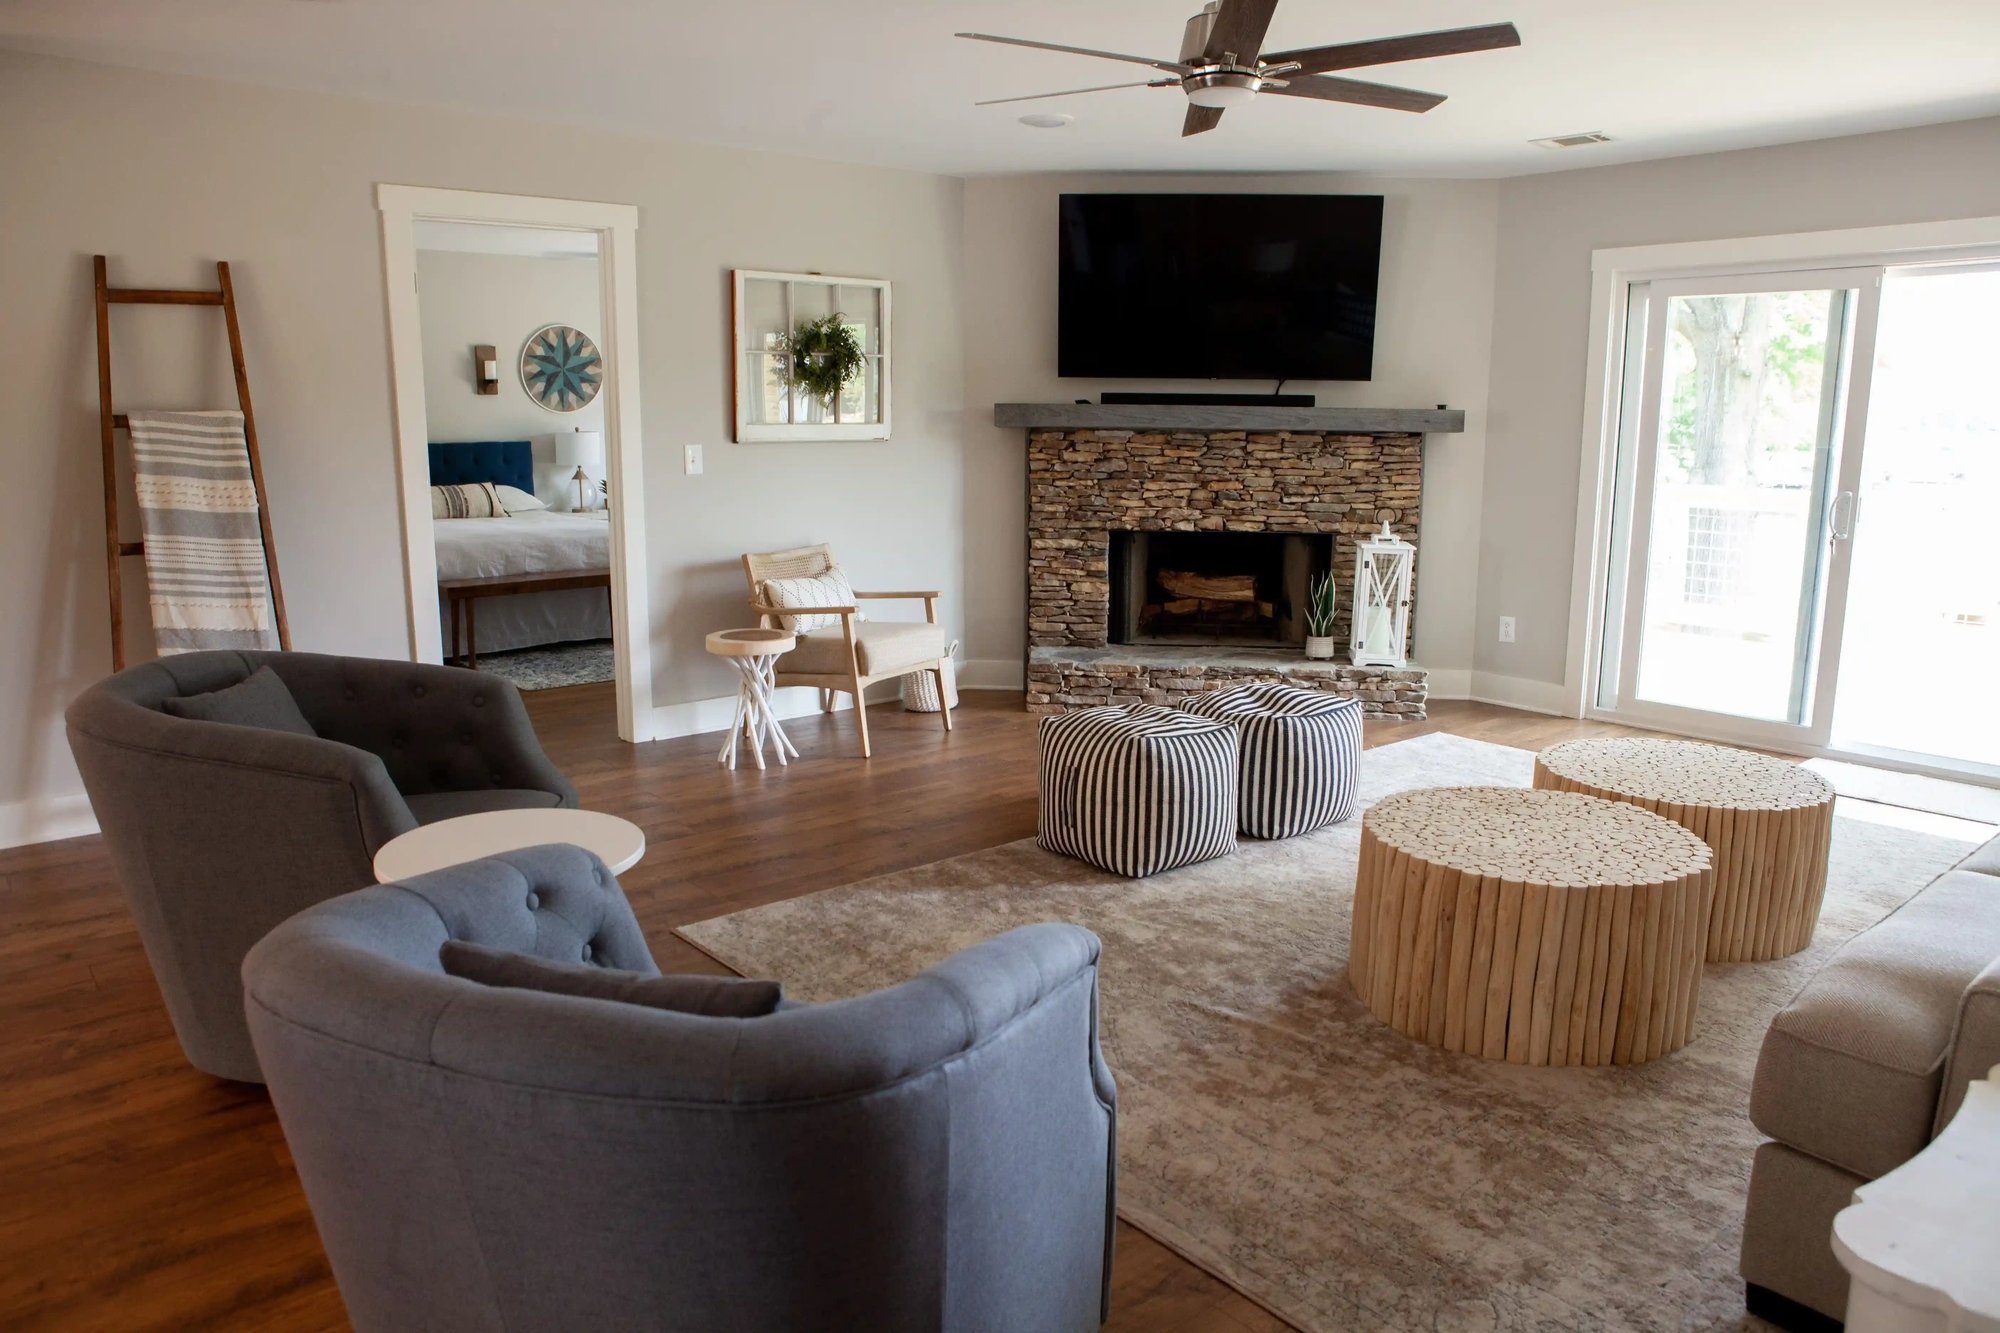 Living Room with Stone Fireplace in Remodeled Home _ PAXISgroup Custom Home Builders in GA_11zon (1)